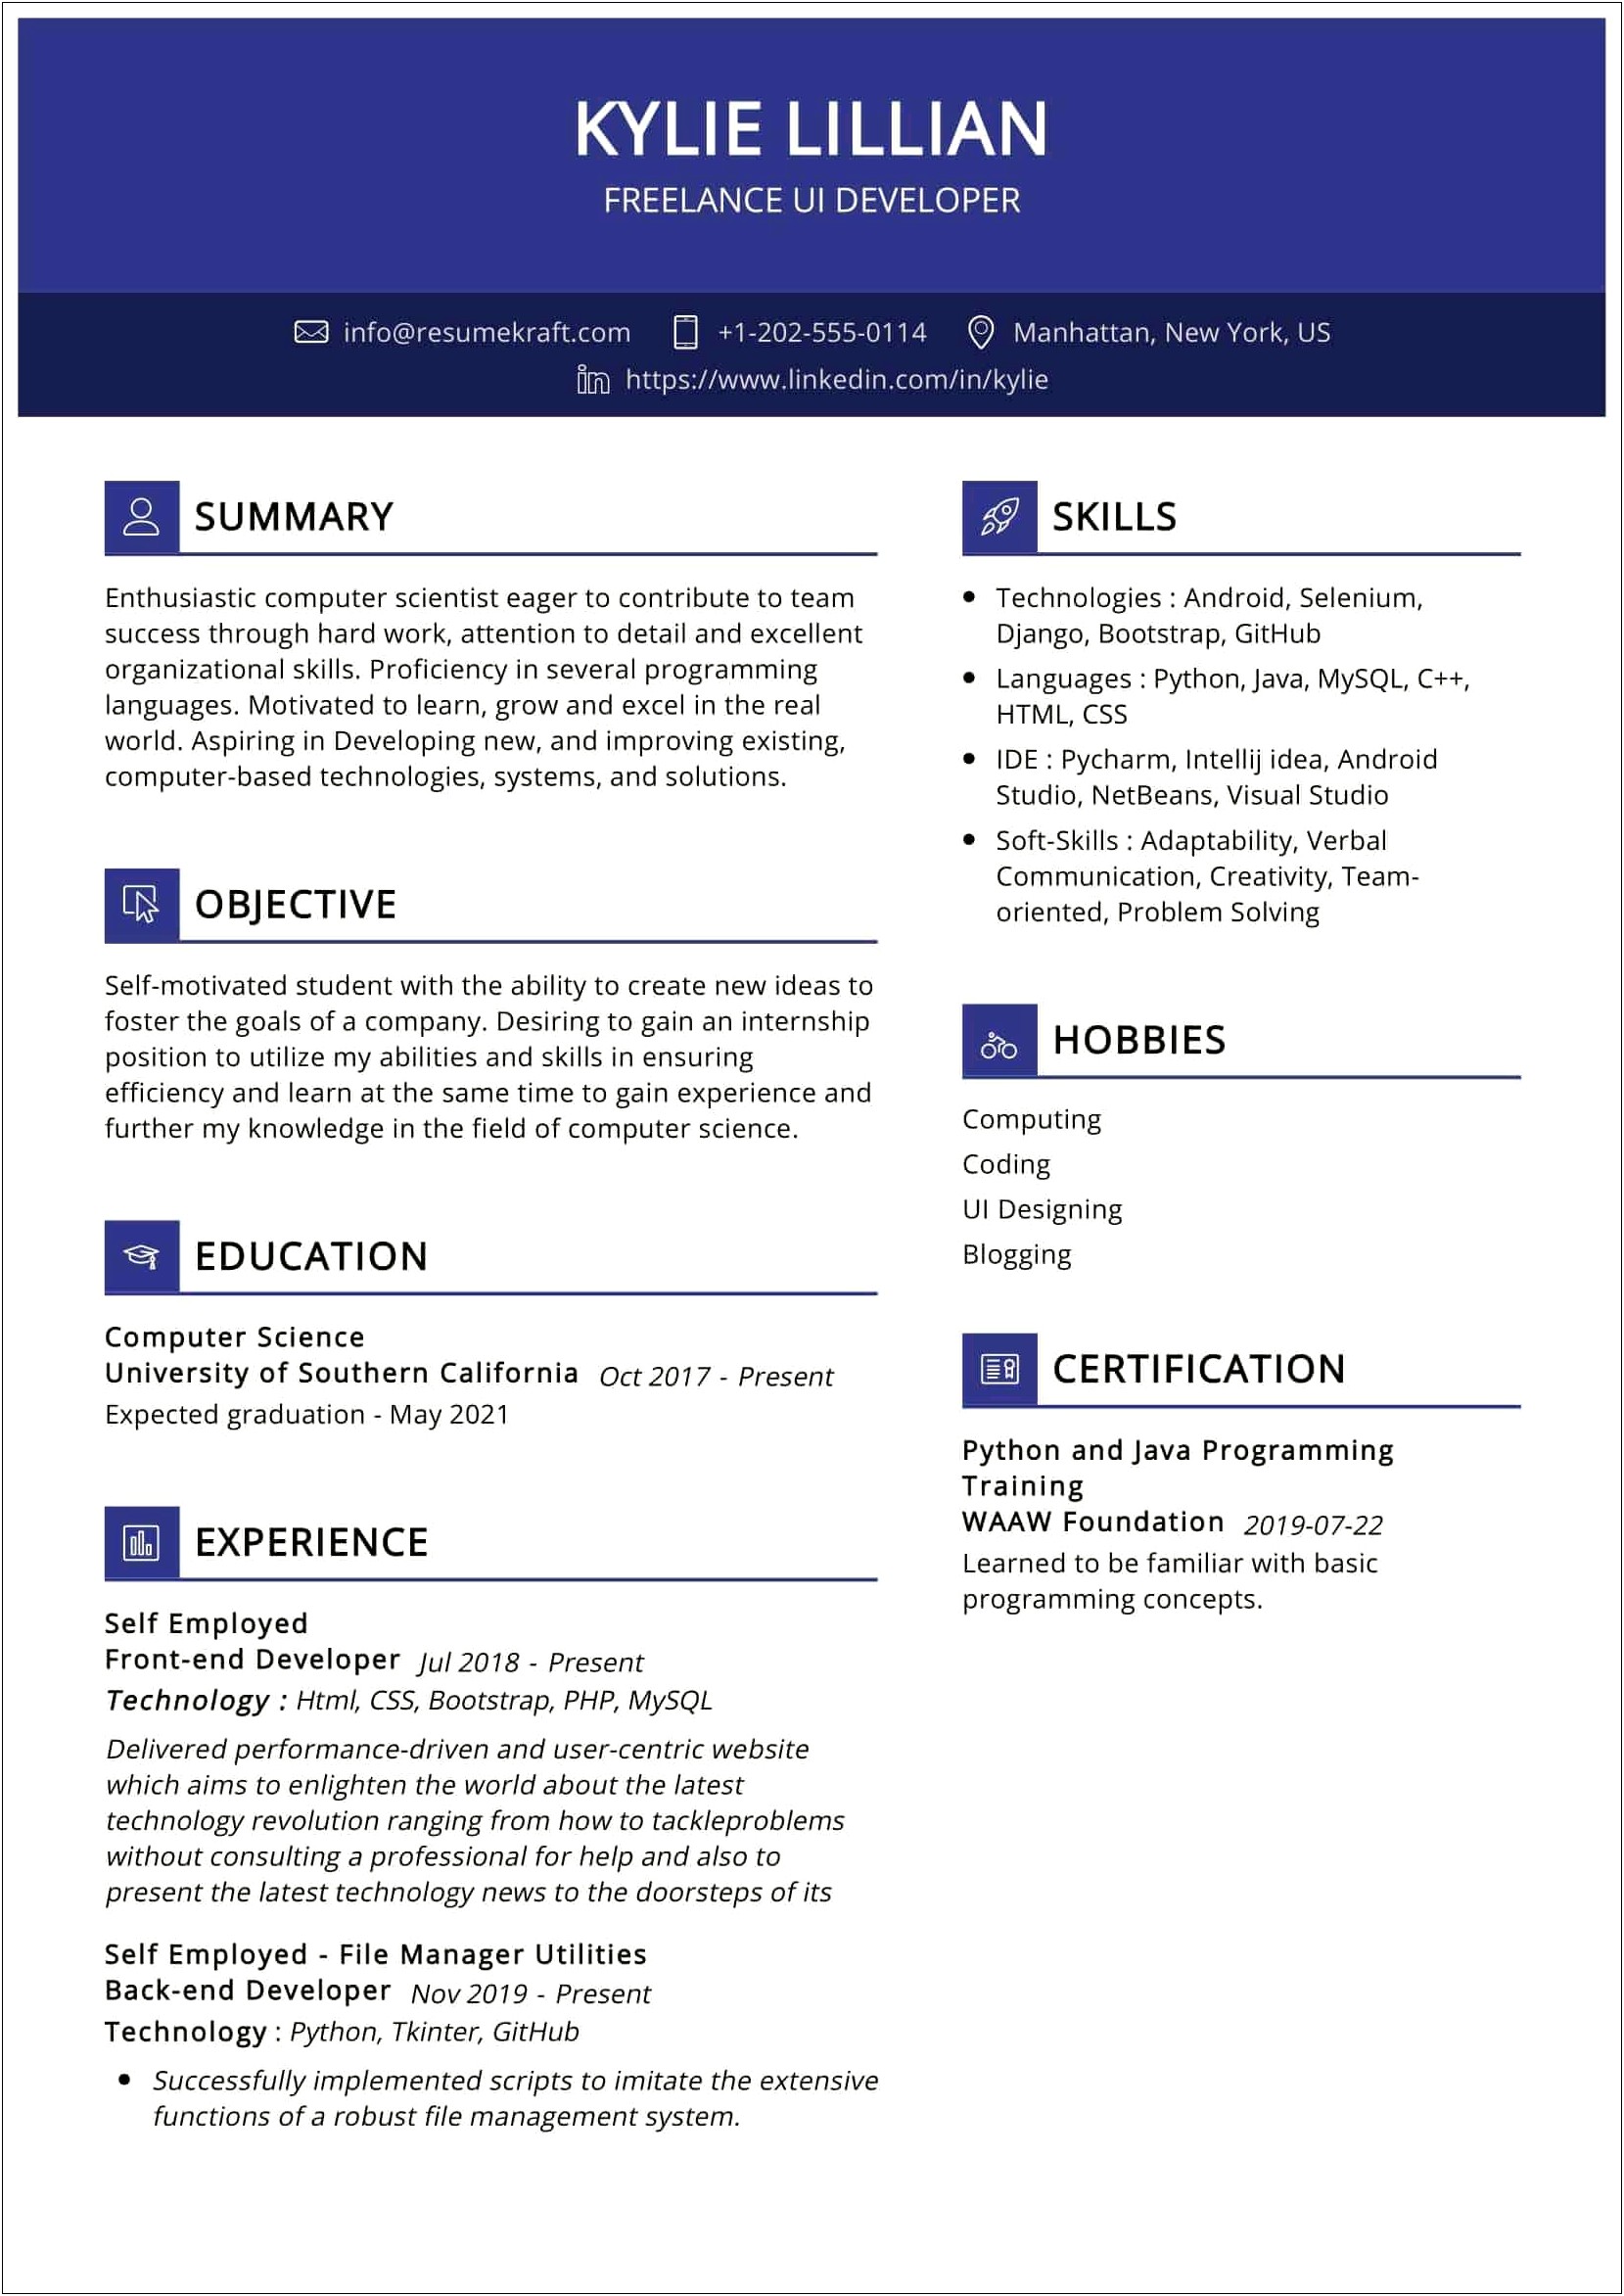 Resume For Someone With Freelance Experience